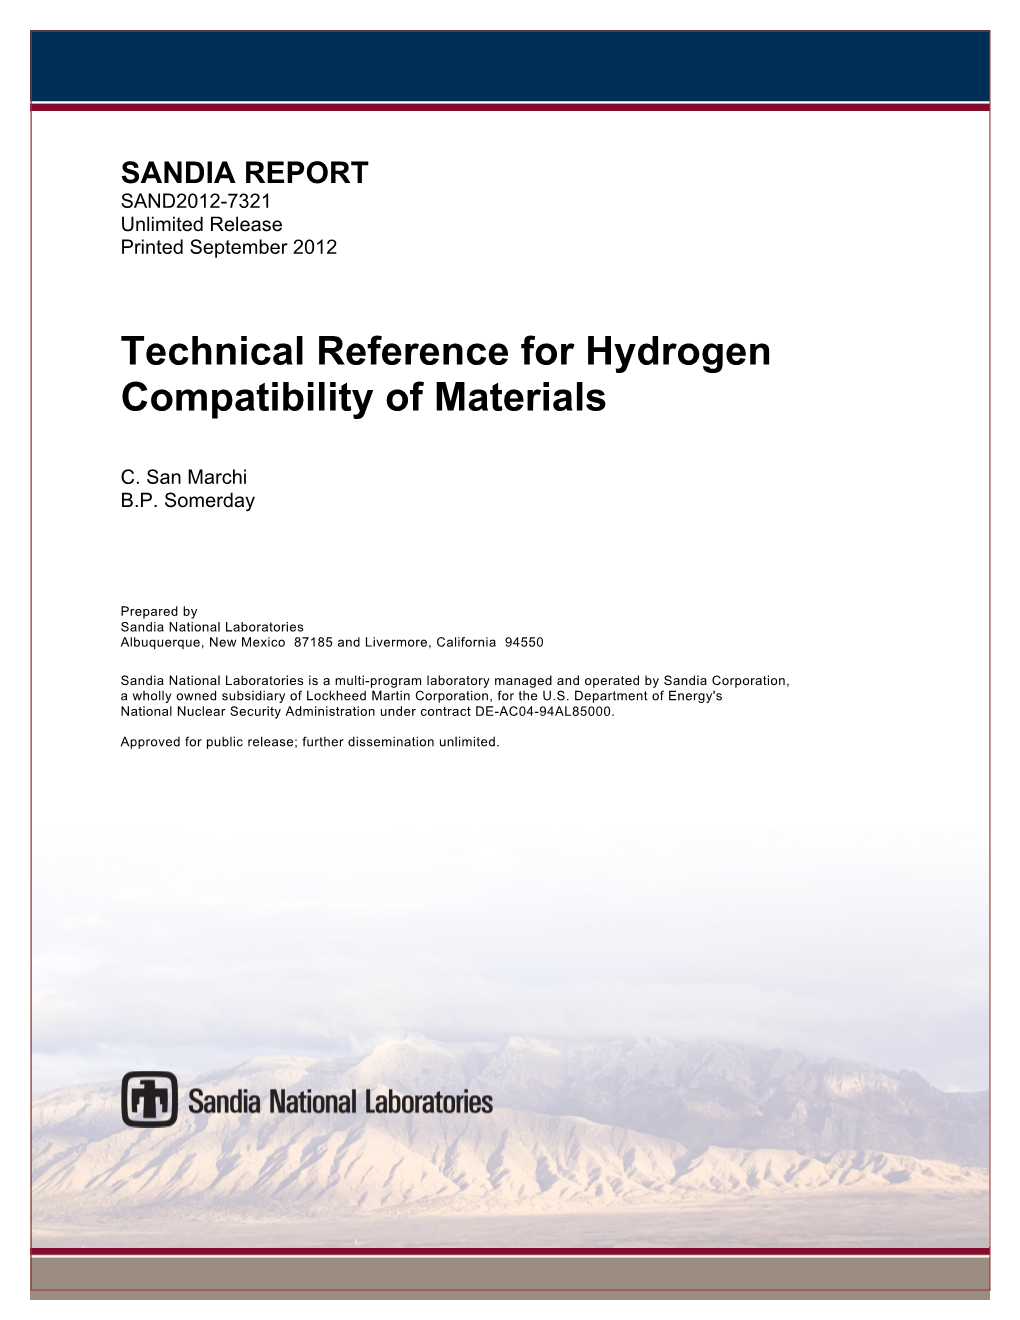 Technical Reference on Hydrogen Compatibility of Materials